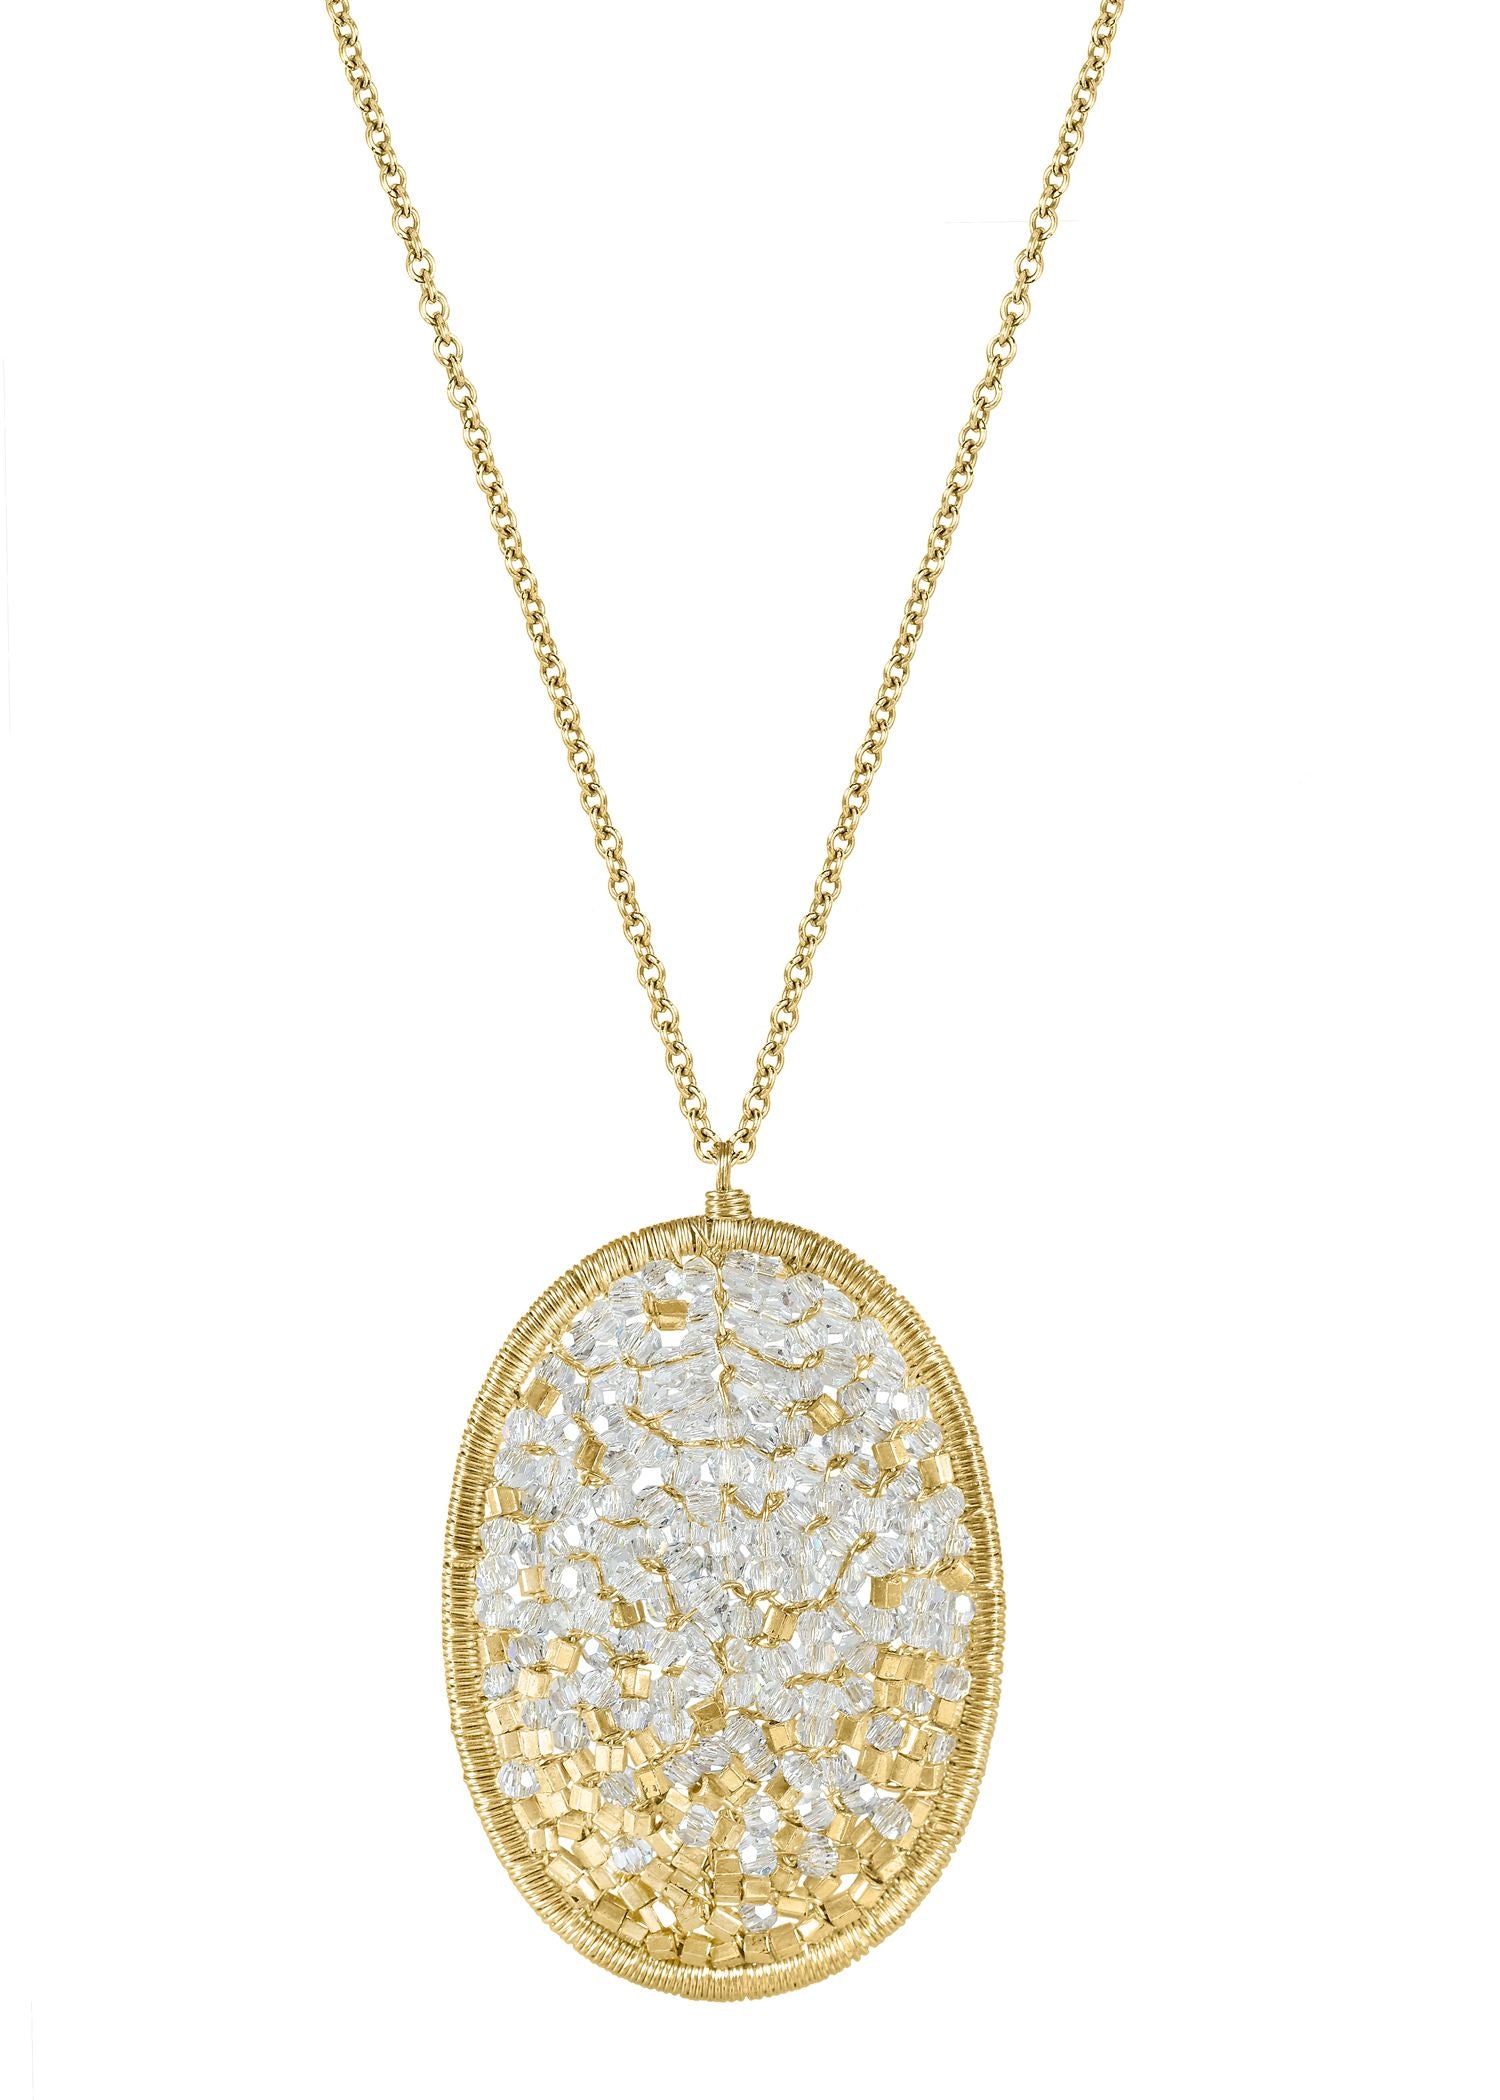 Crystal 14k gold fill Necklace measures 17" in length Pendant measures 1-1/2" in length and 1" in width Handmade in our Los Angeles studio